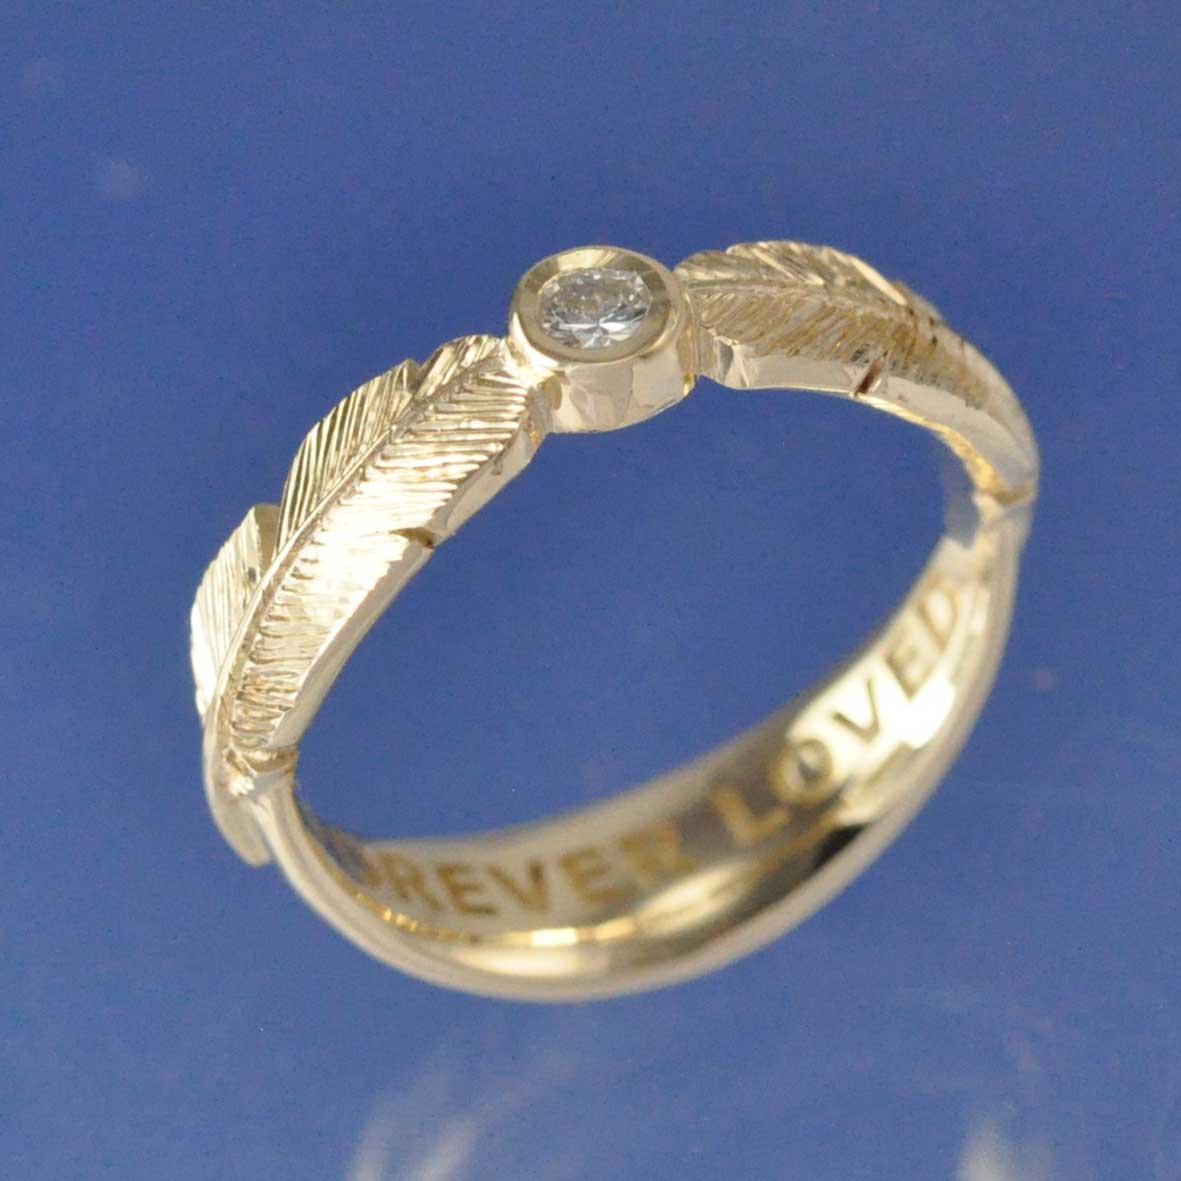 Diamond Feather Cremation Ash Ring Ring by Chris Parry Jewellery